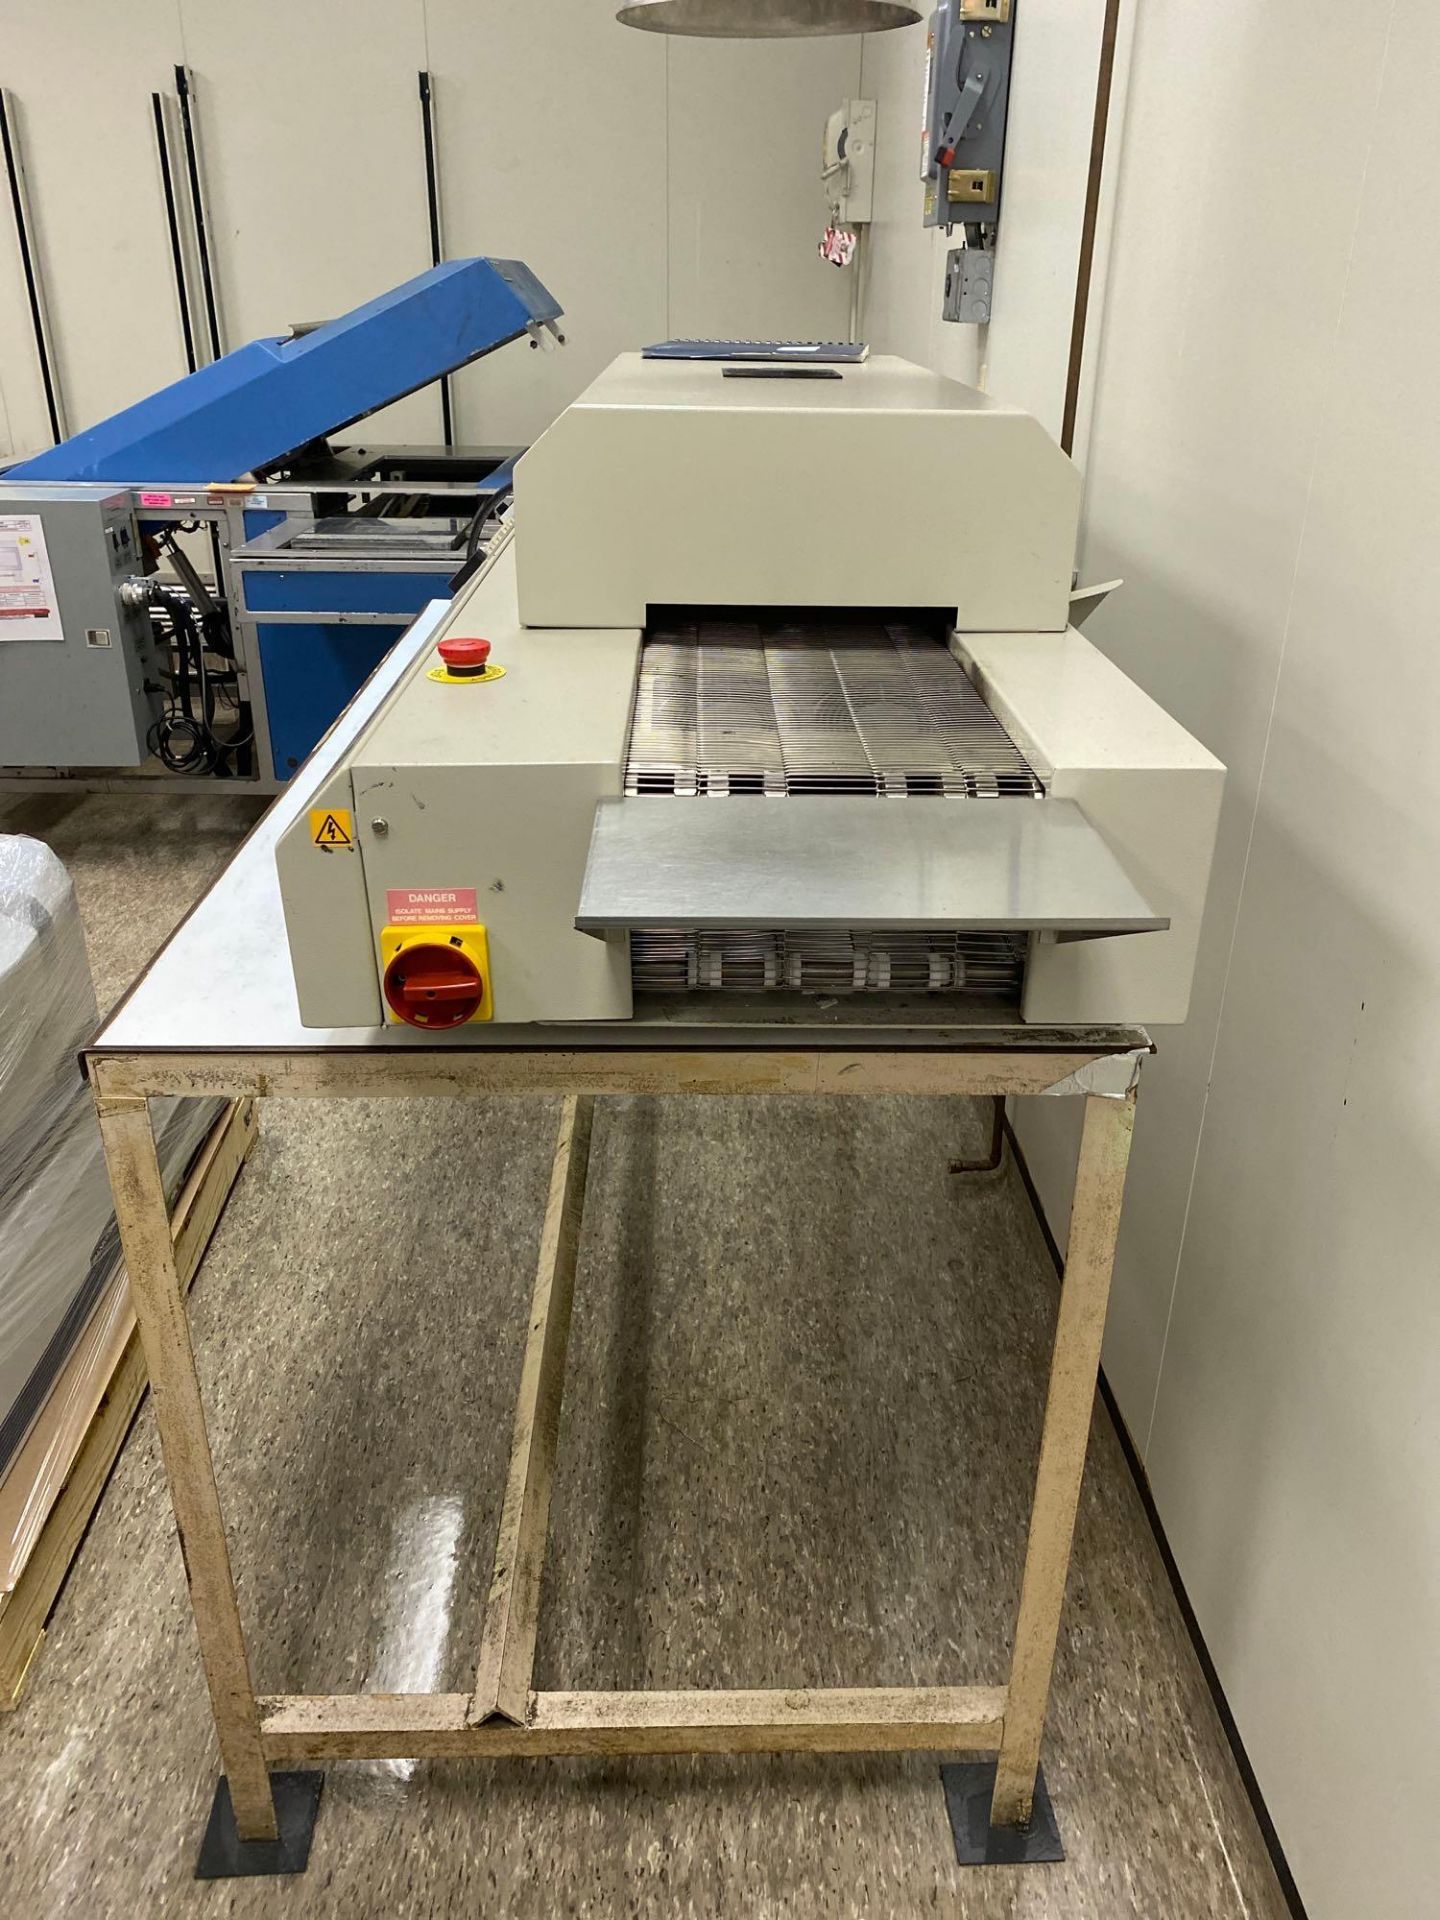 Research International Quantum 30 Infrared Conveyor Oven - Image 3 of 6